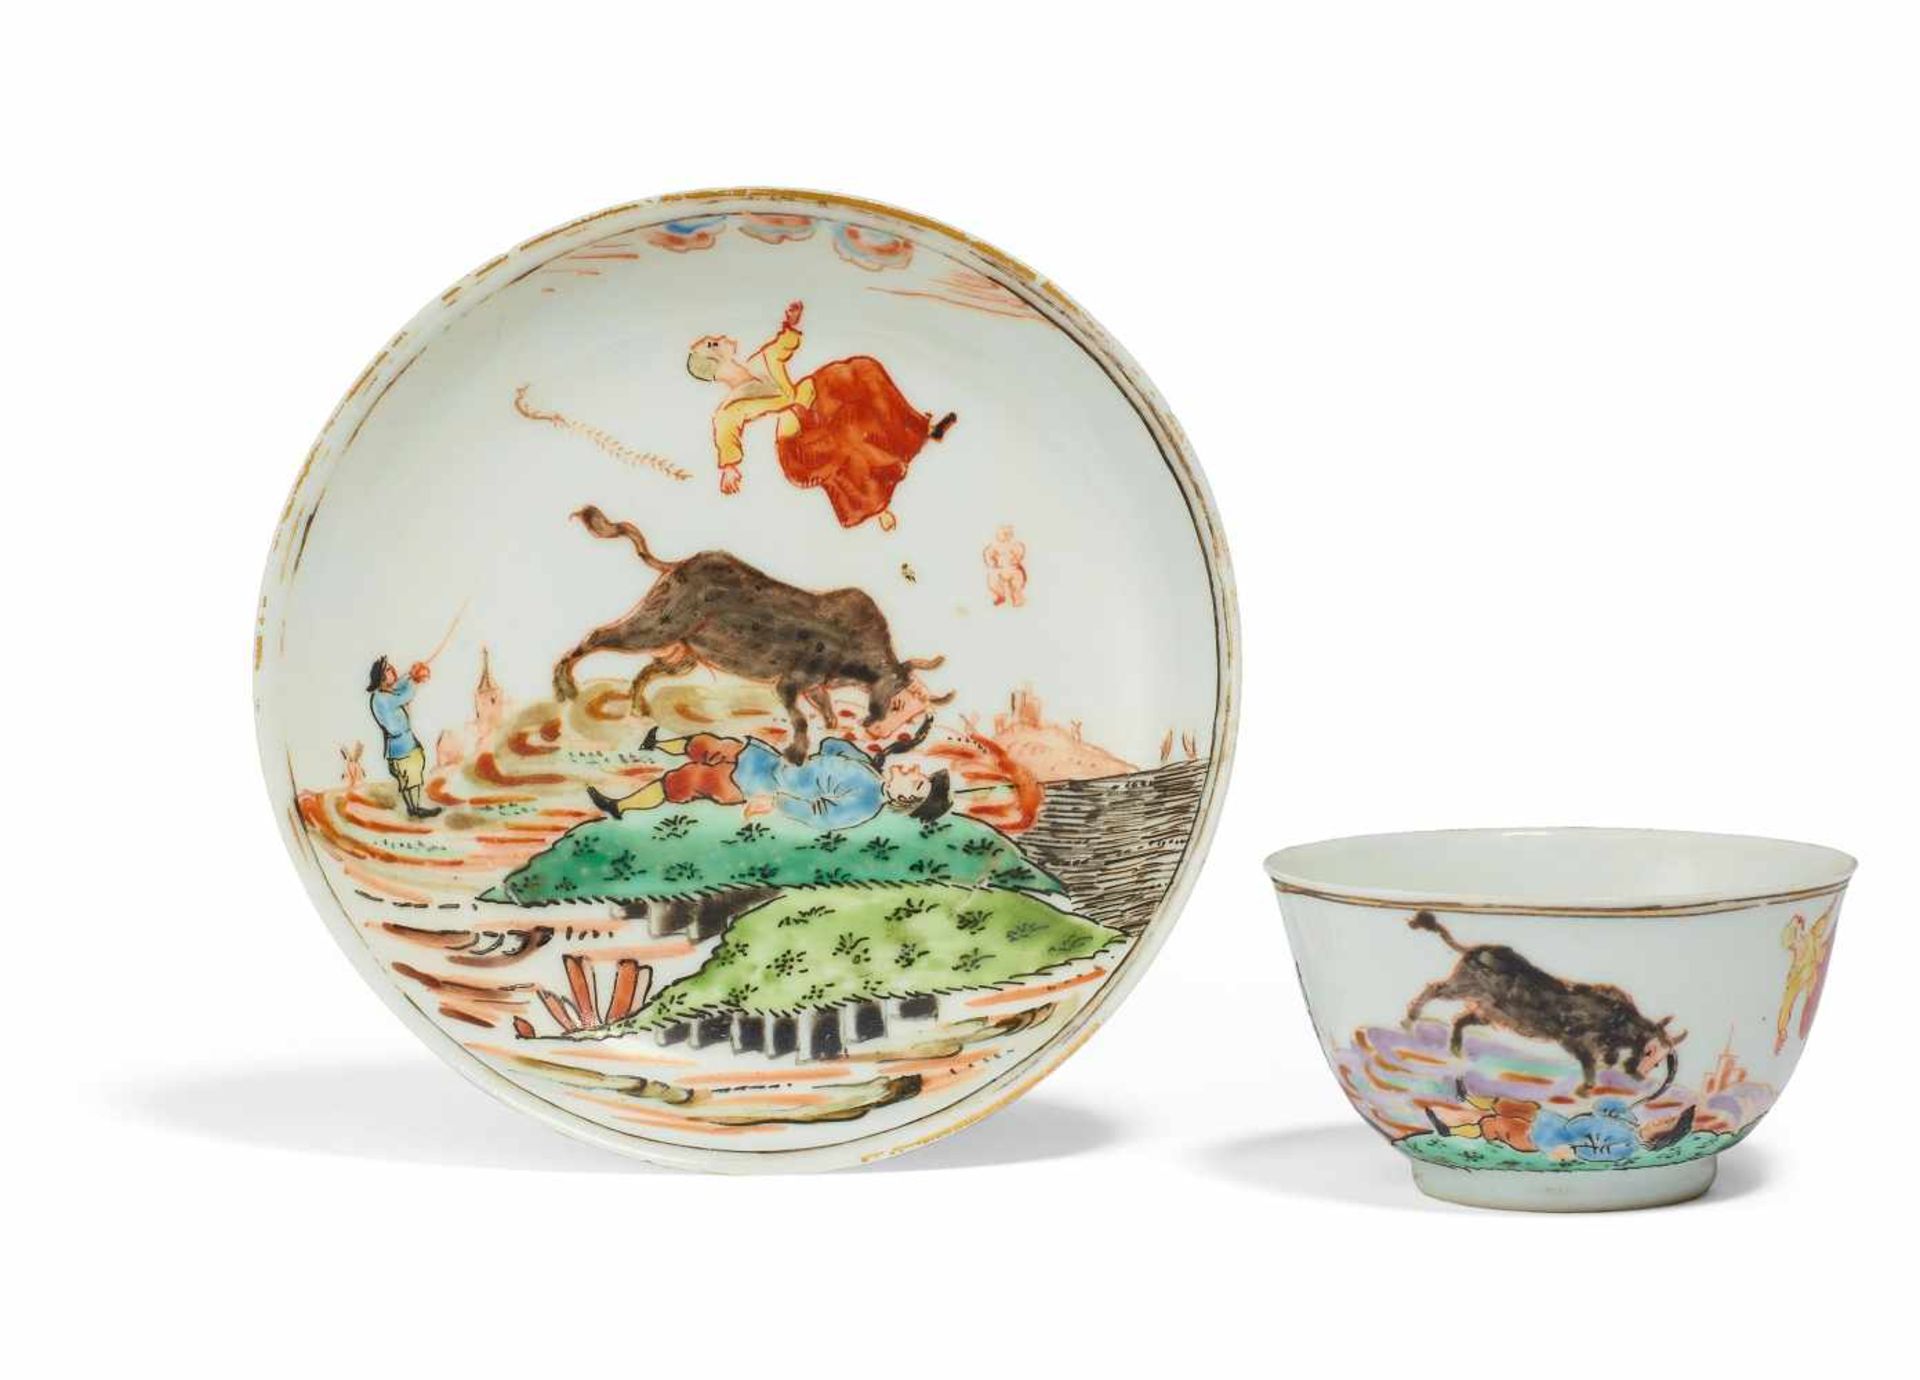 RARE CUP AND SCAUER SHOWING THE 'WONDER OF ZAANDAM'. China. Export porcelain. Qing dynasty. Qianlong